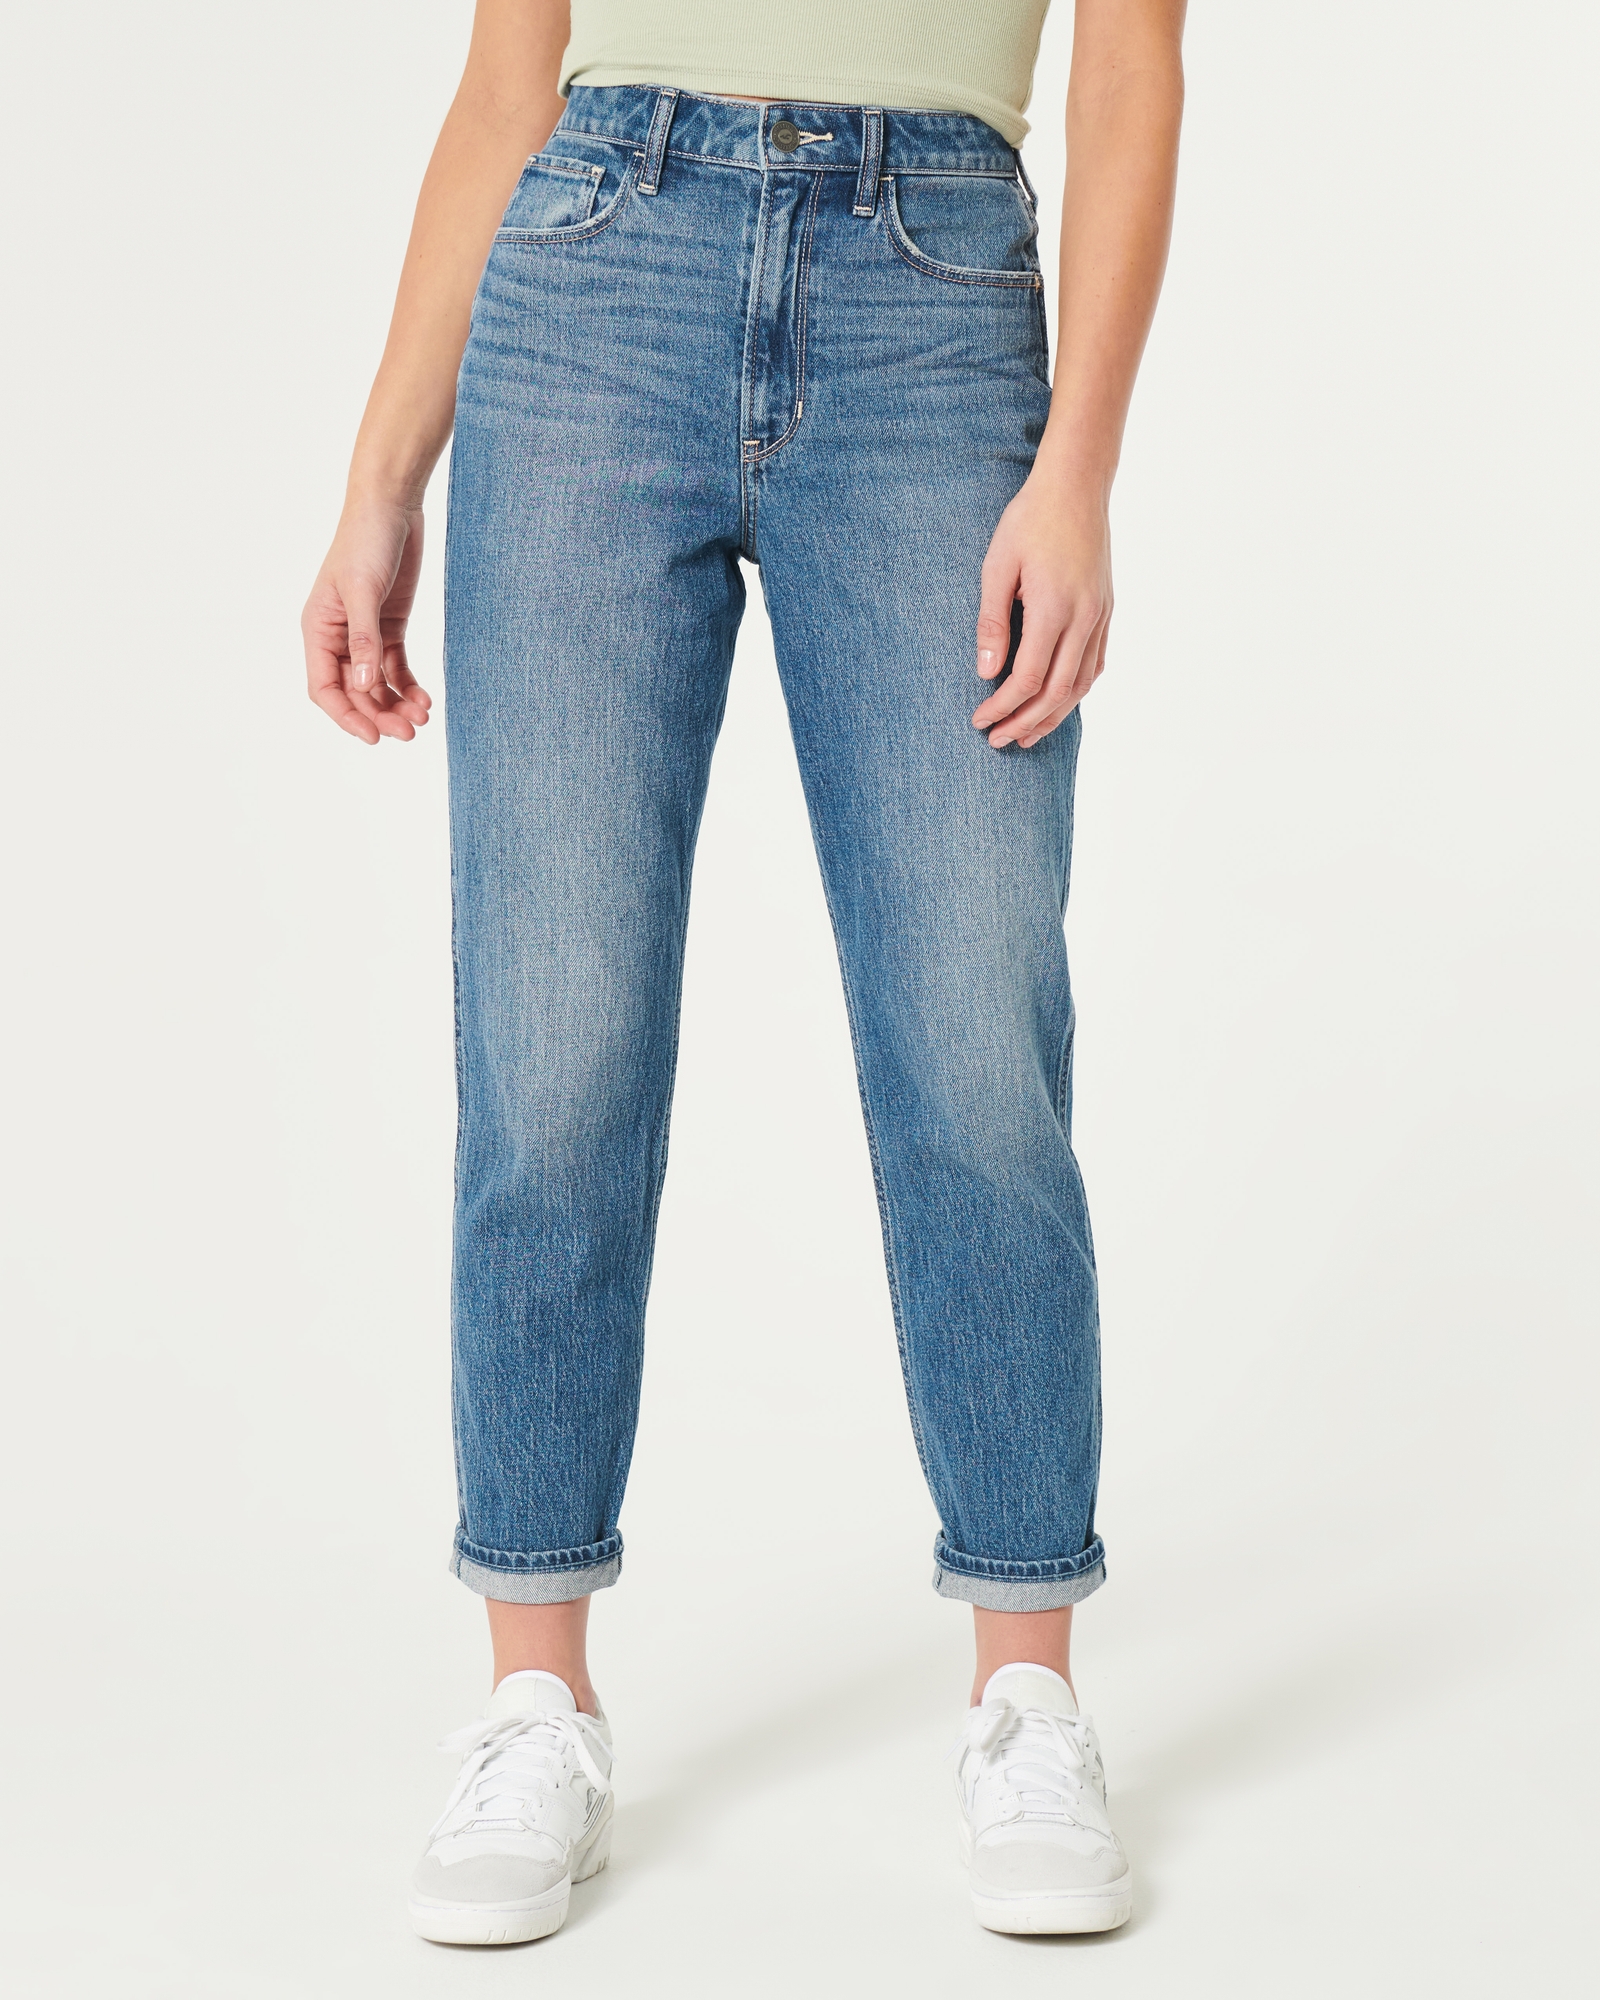 Hollister Co. - The 👖 you wear on 🔁: Paper-Bag Mom Jeans